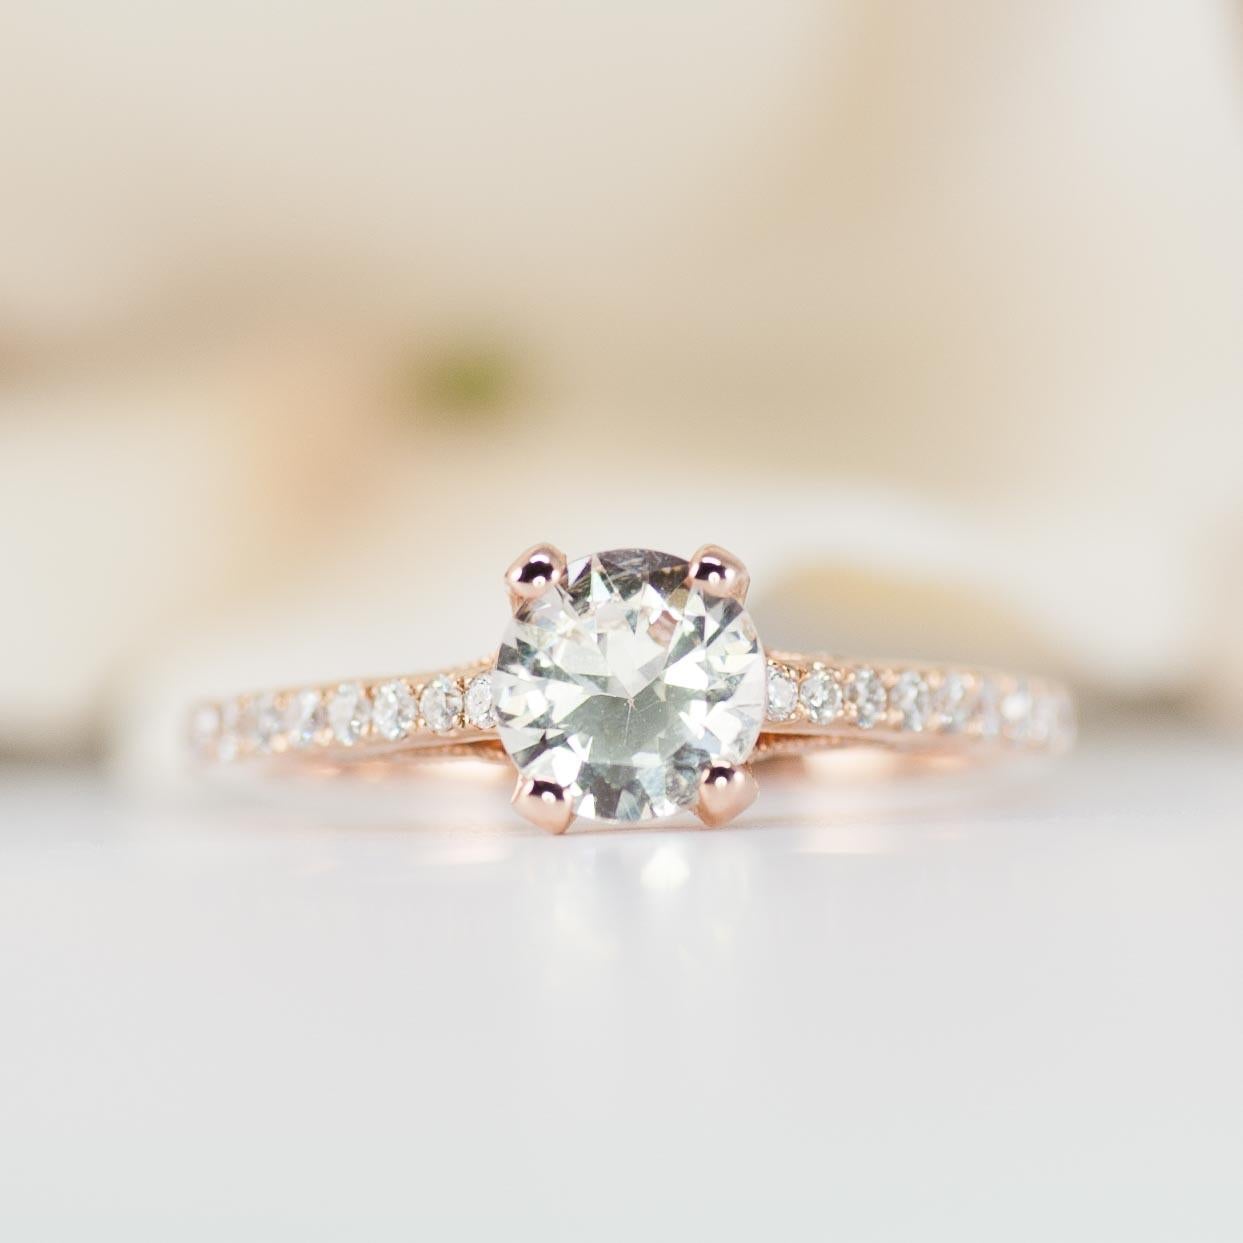 This rose gold engagement ring features a 1.25ct white sapphire as the main center gem--a beautiful alternative to a traditional diamond.

Adding to the art deco design style of the setting are 64 sparkling diamonds on band and sides of the